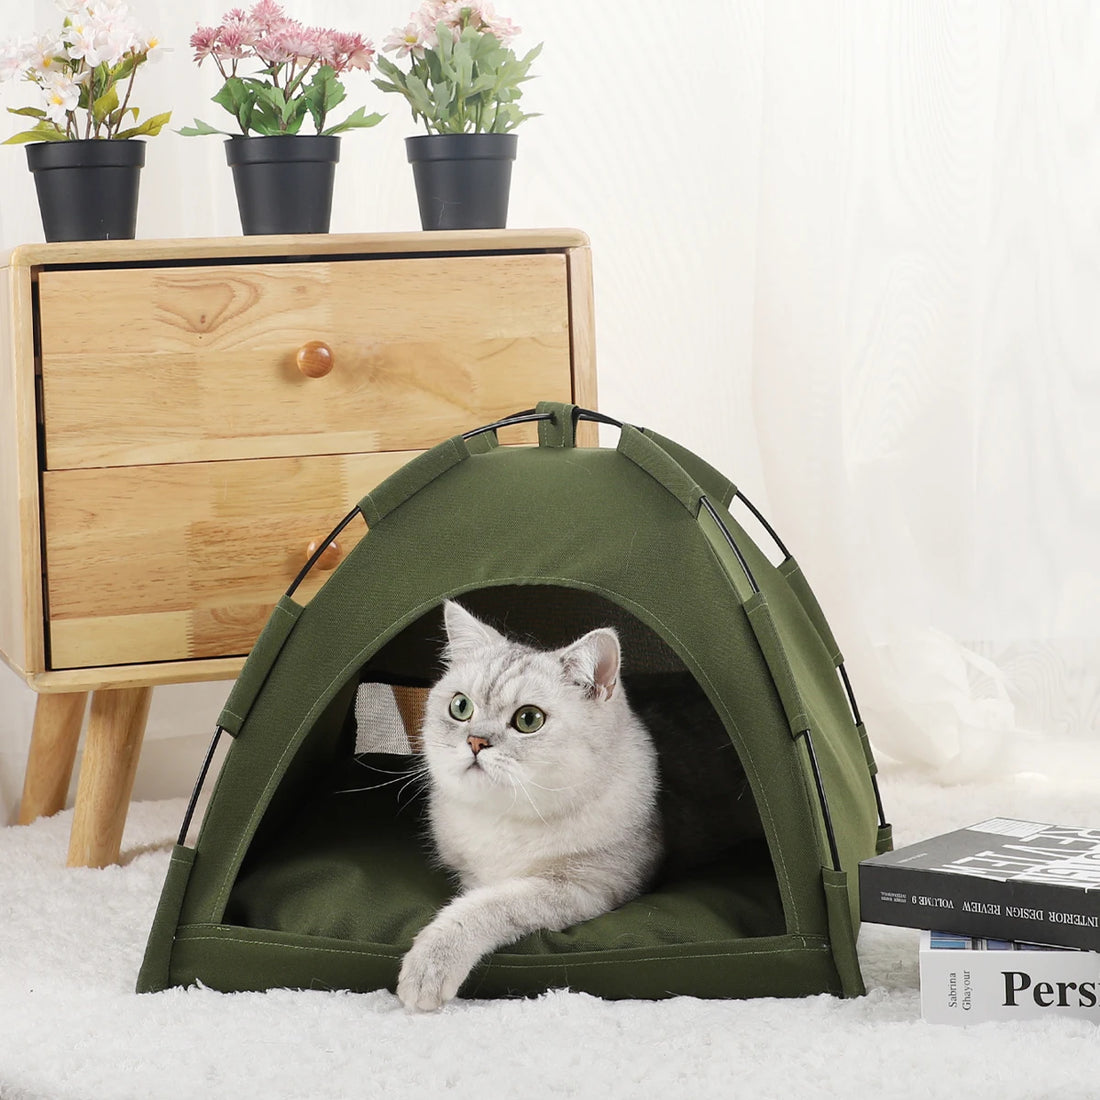 Pet Tent Bed Cats House Supplies Products Accessories Warm Cushions Furniture Sofa Basket Beds Winter Clamshell Kitten Tents Cat - My Store